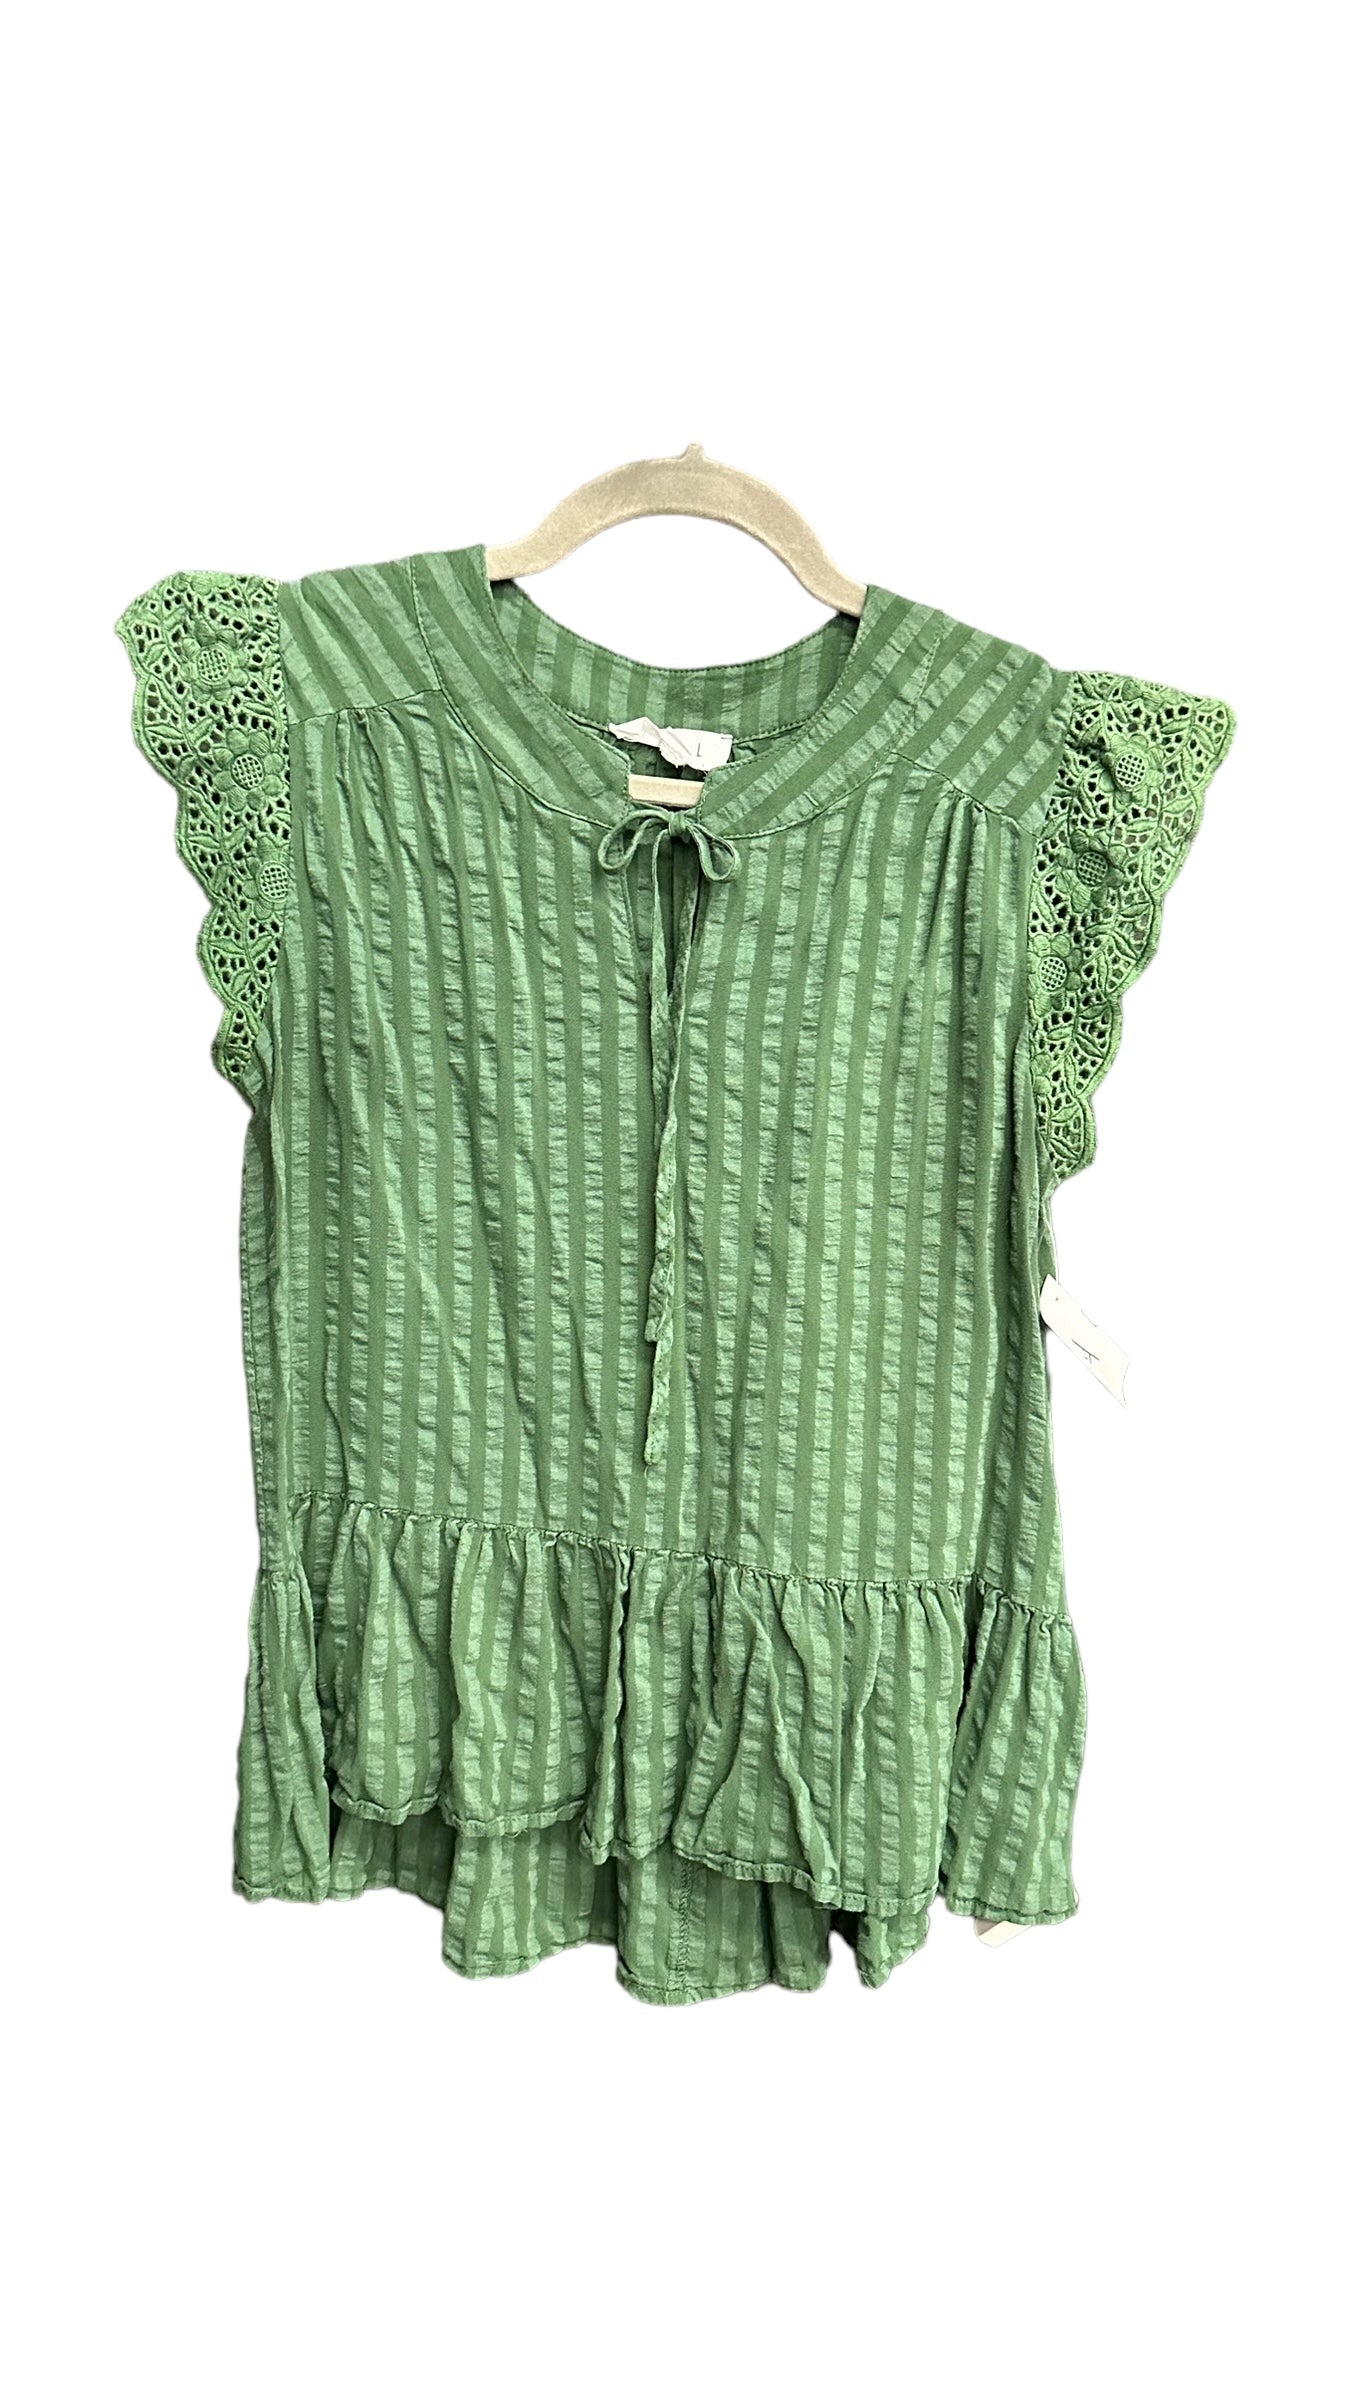 Green Top Short Sleeve Thml, Size S